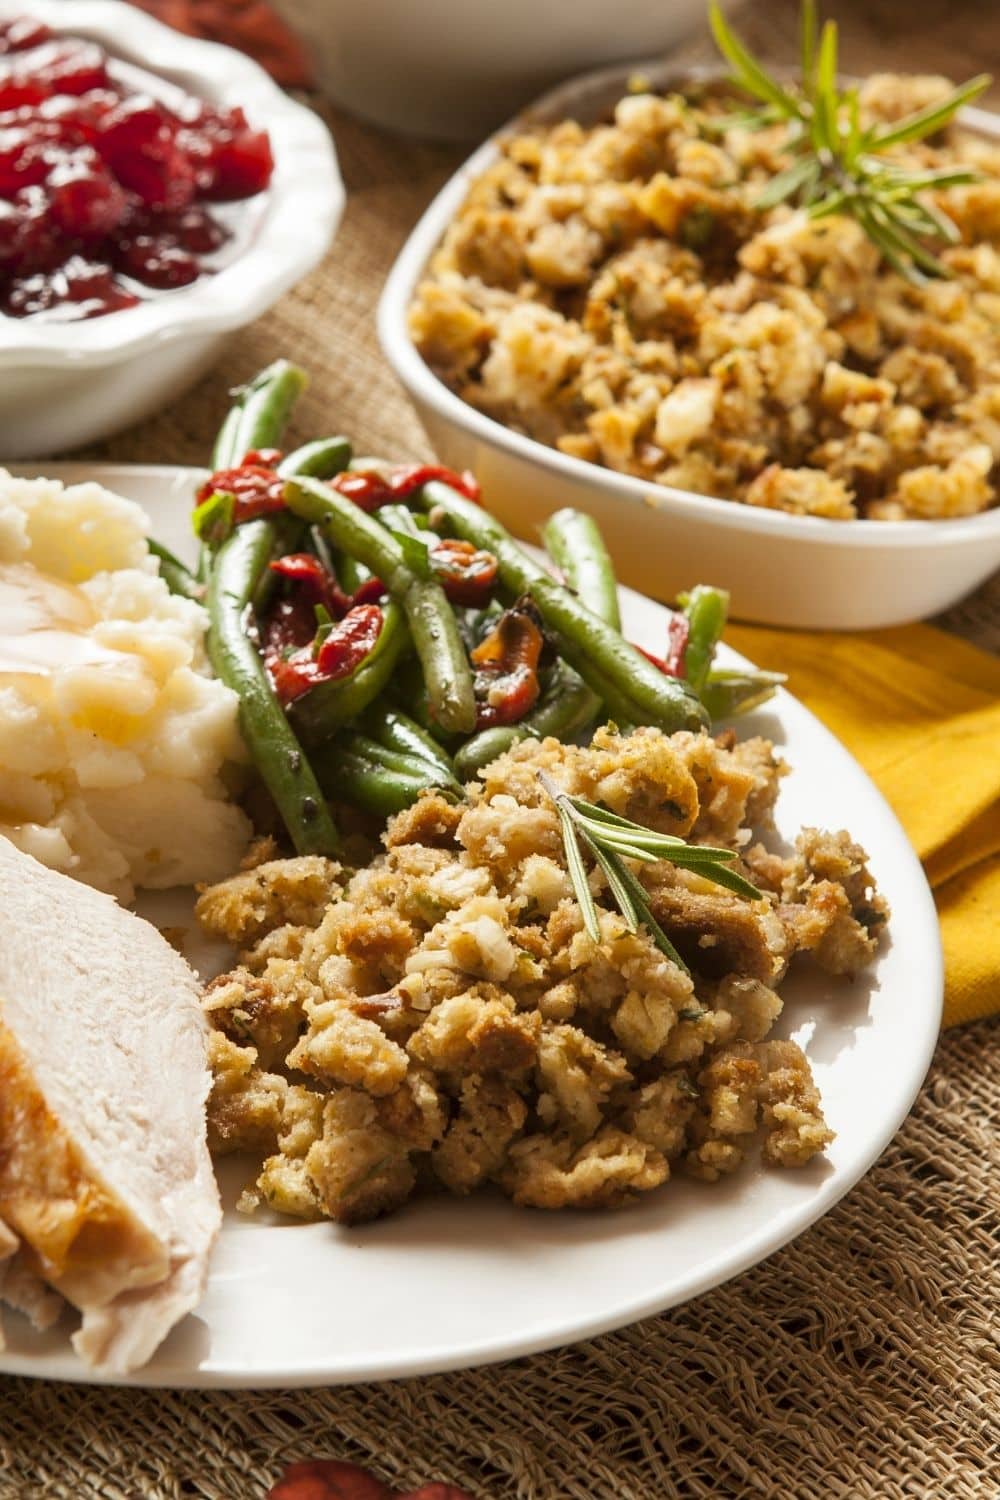 Thanksgiving Dinner: Turkey, Stuffing, Mashed Potatoes and Green Beans